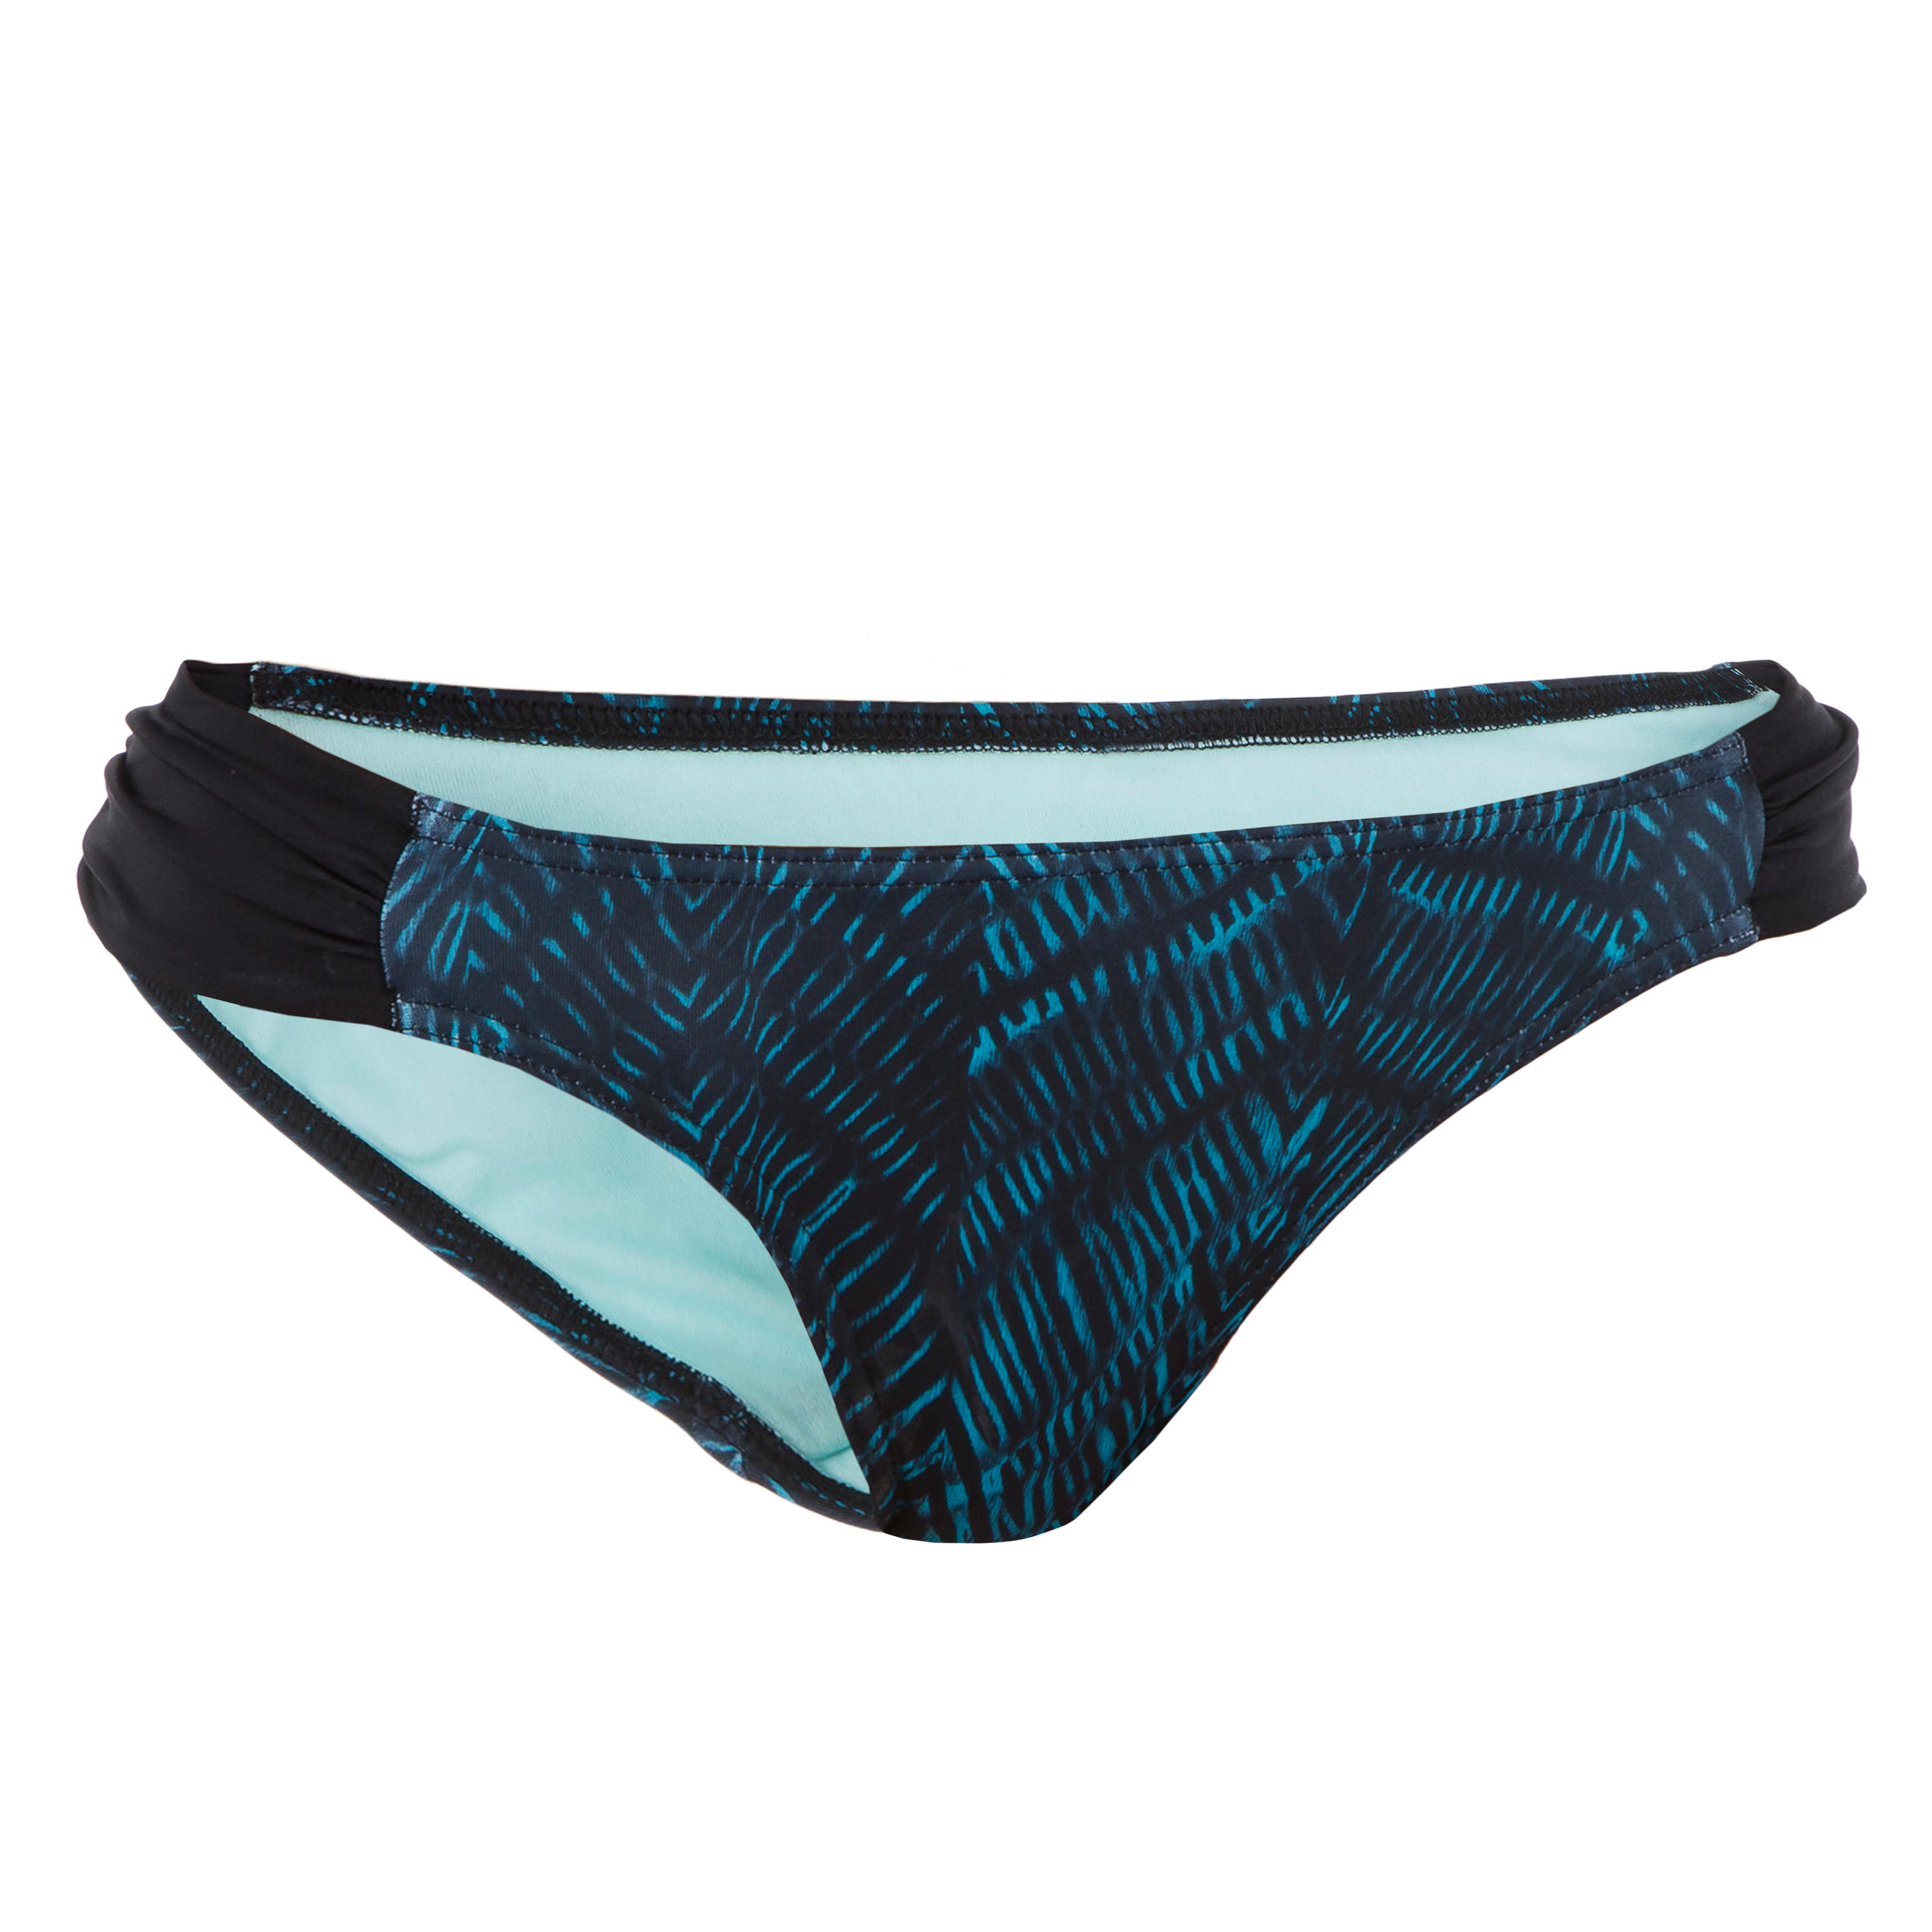 Niki Women's Surfing Swimsuit Bottoms with Gathering at the Sides - Shibo Blue 2/7